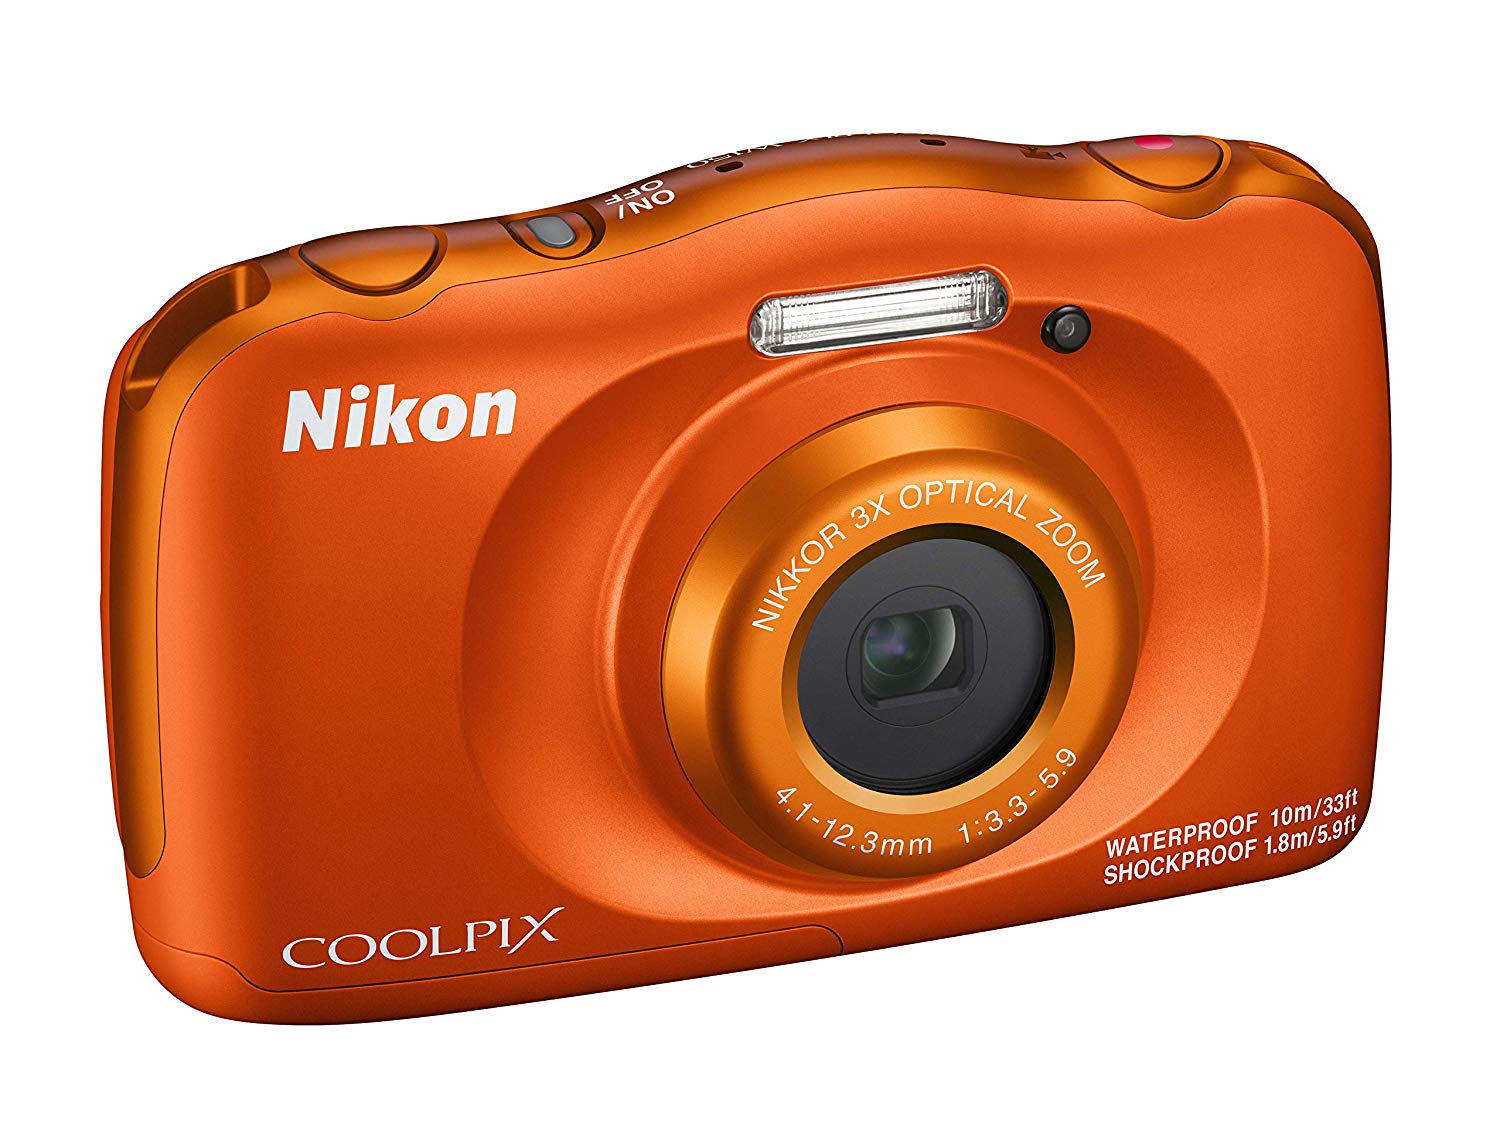 Fotocamere subacquee Nikon Coolpix W150